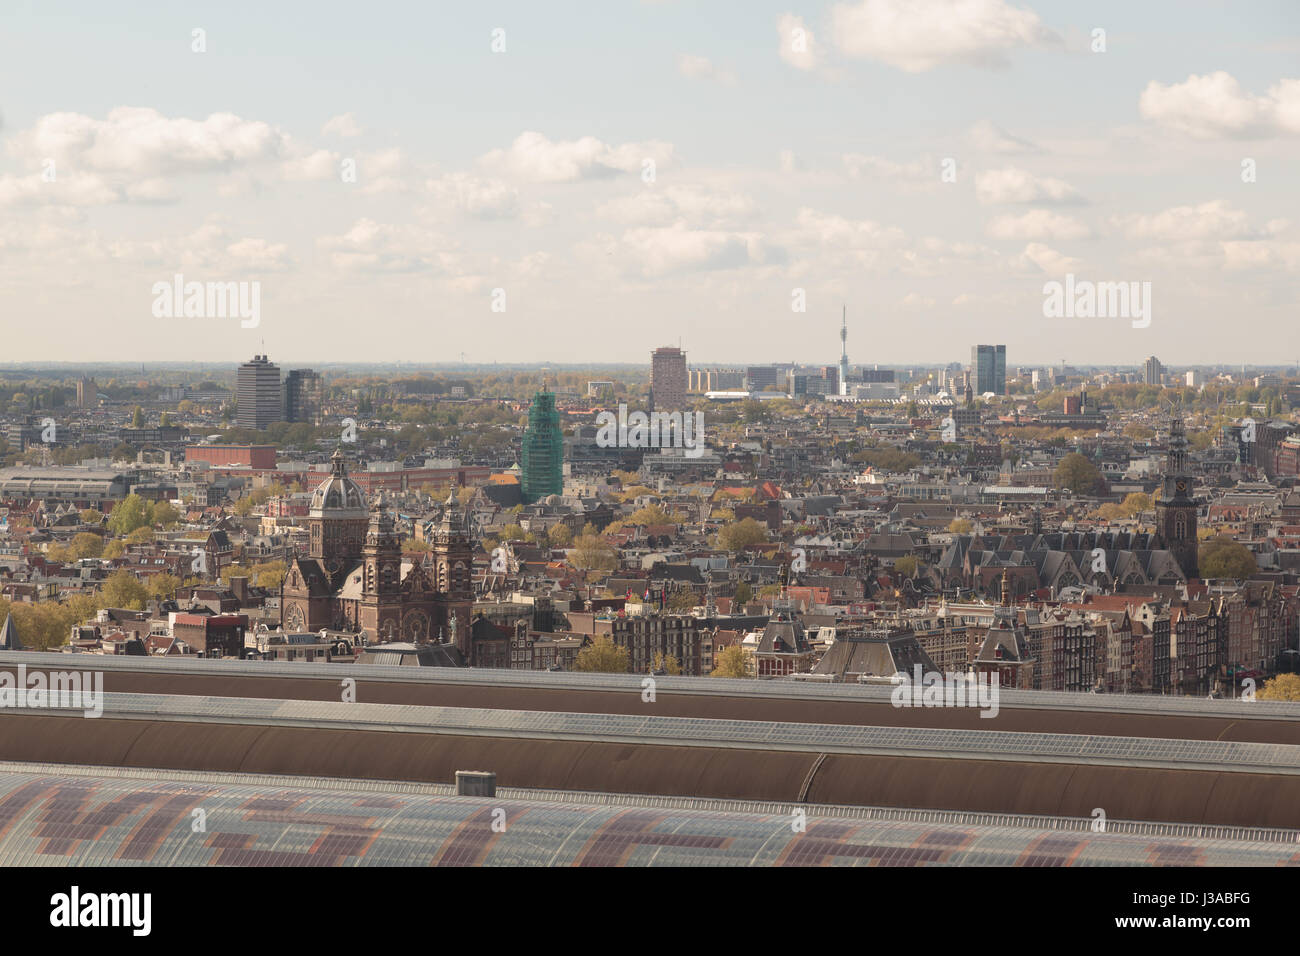 The city of Amsterdam, Netherlands, as seen from the top of the Amsterdam tower on the northern side of the main canal. Stock Photo